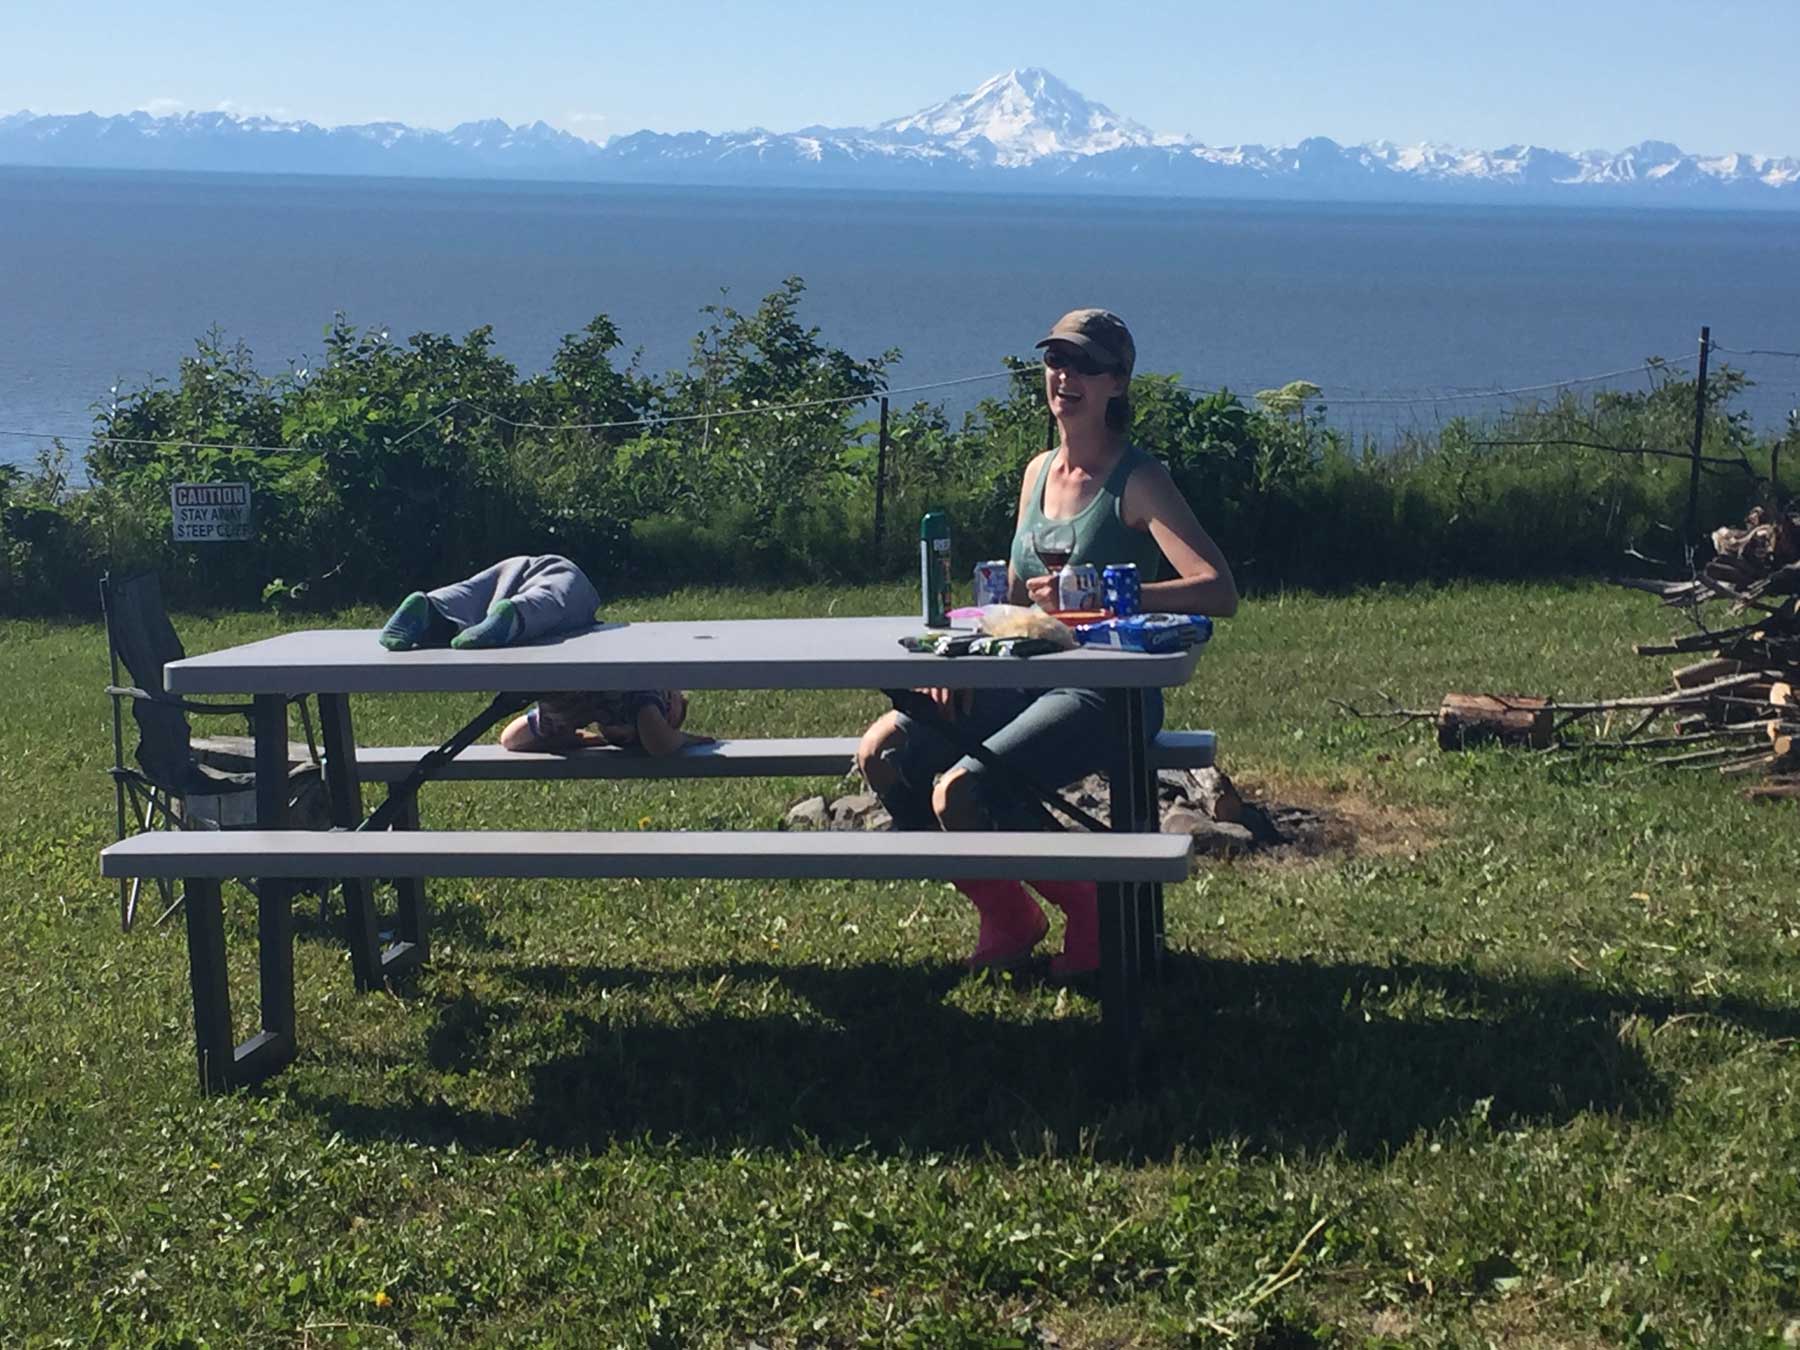 Woman and child eating at a picnic table at the campground